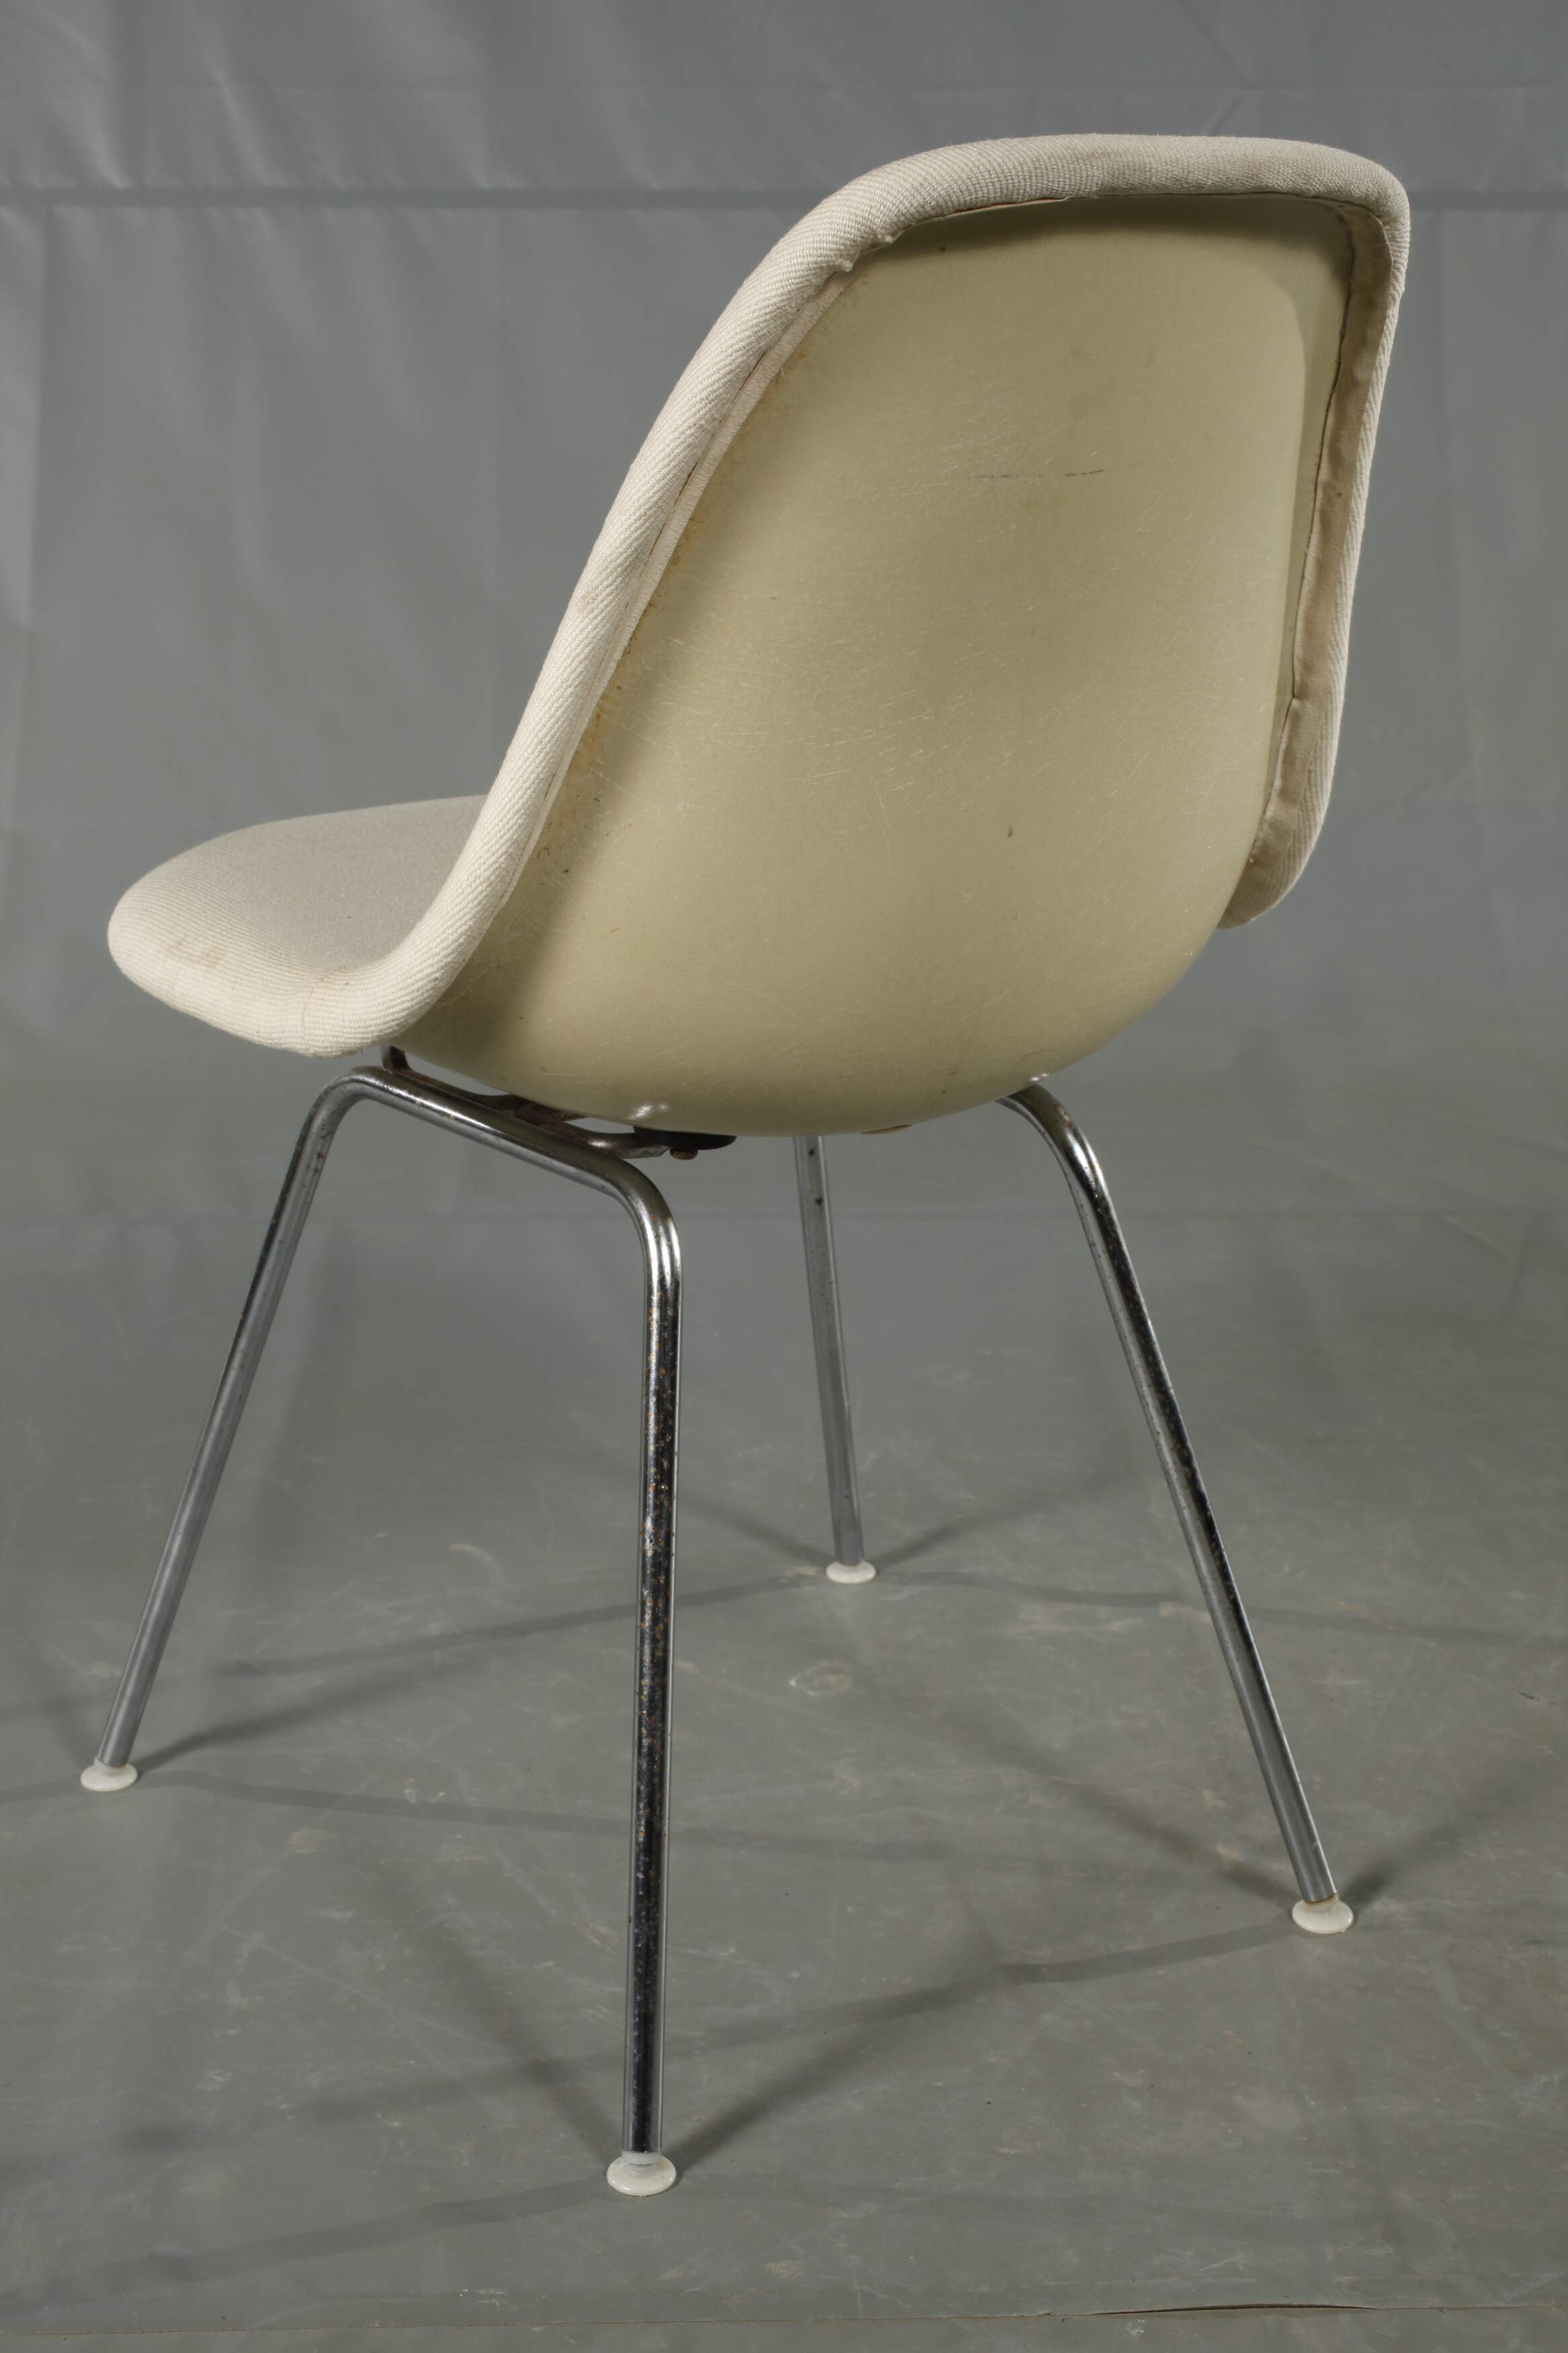 Two Herman Miller chairs - Image 5 of 6